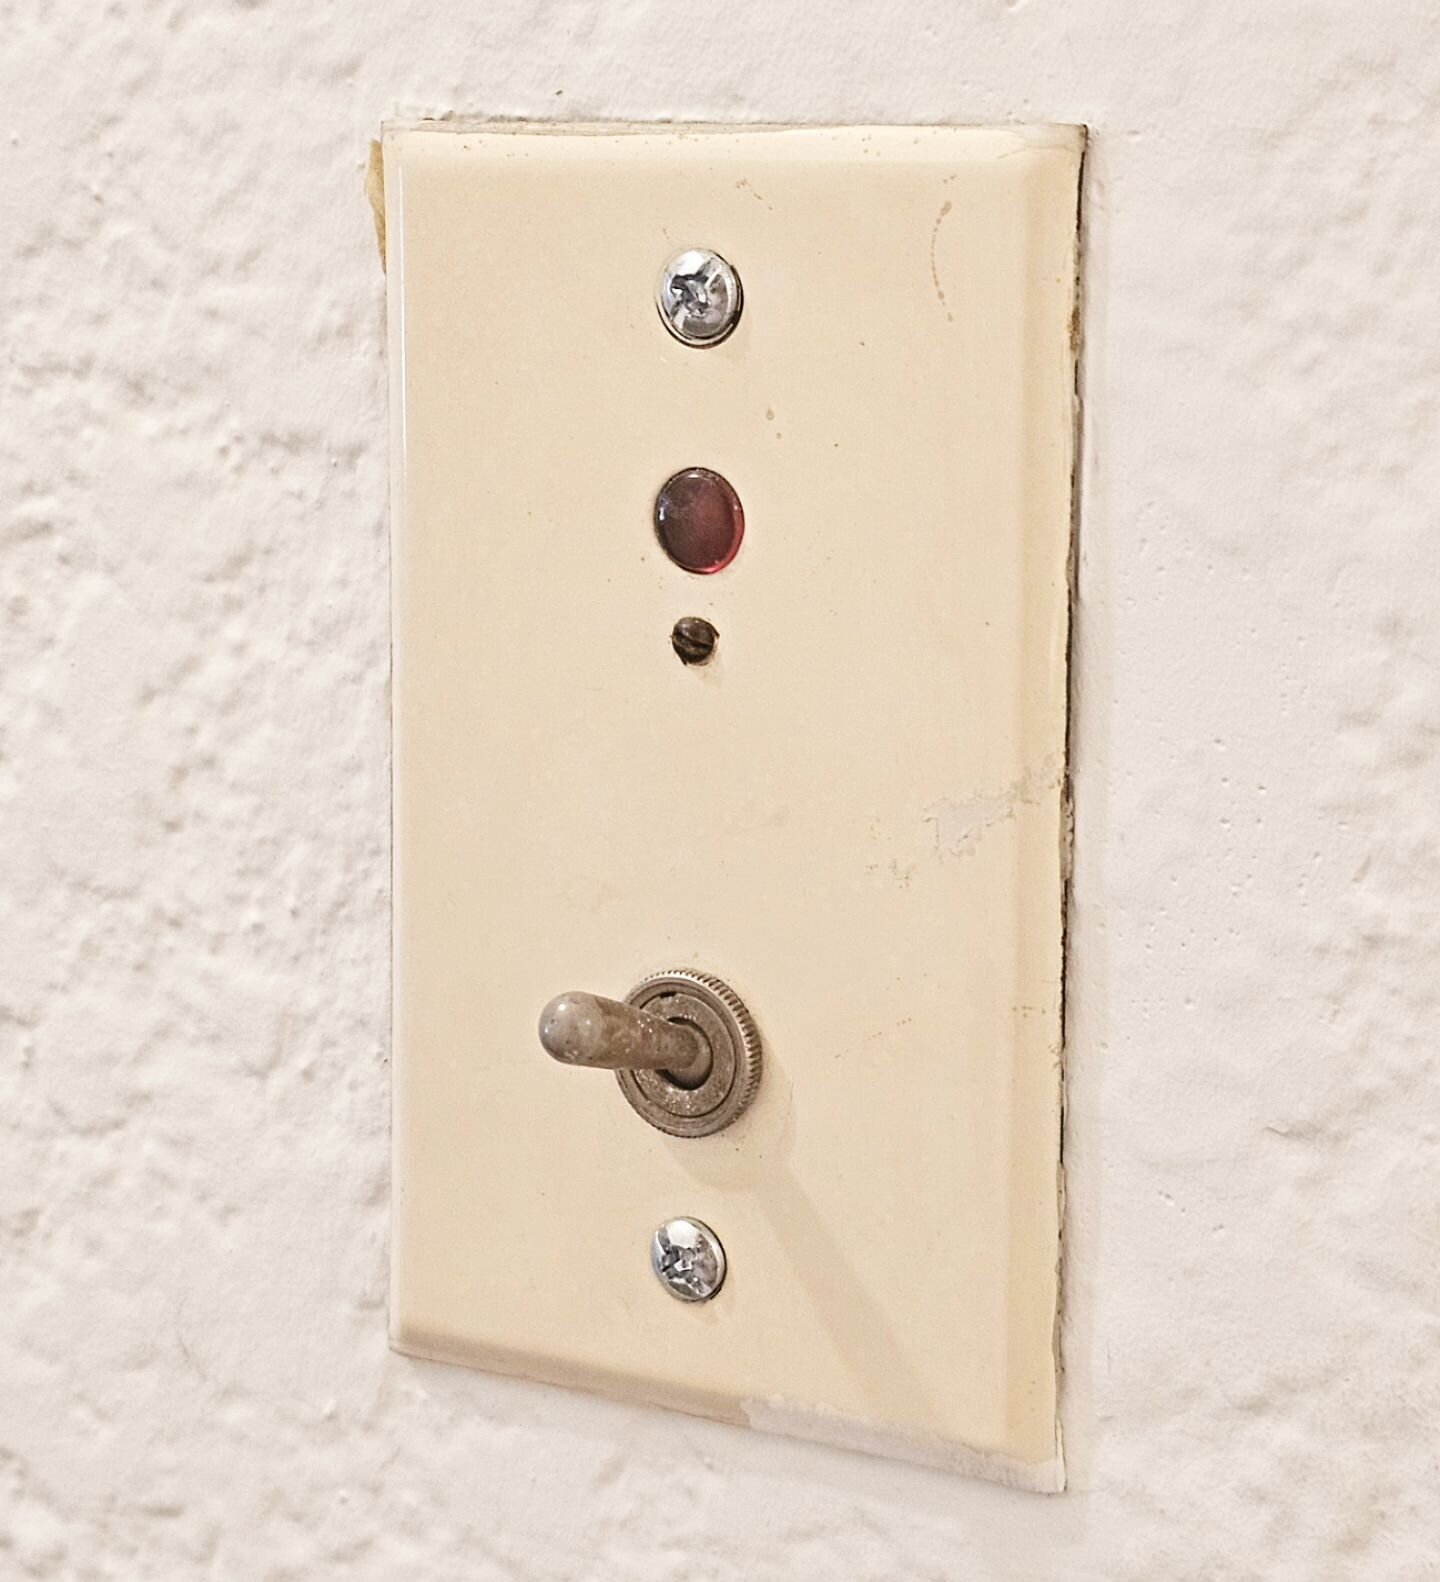 As a former #realestateappraiser, a former full-time #realestatephotographer for several years, and current homeowner of not one, not two, but three houses (yay), I STILL CAN'T FIGURE OUT what this switch is for in my own house next to my own bedroom